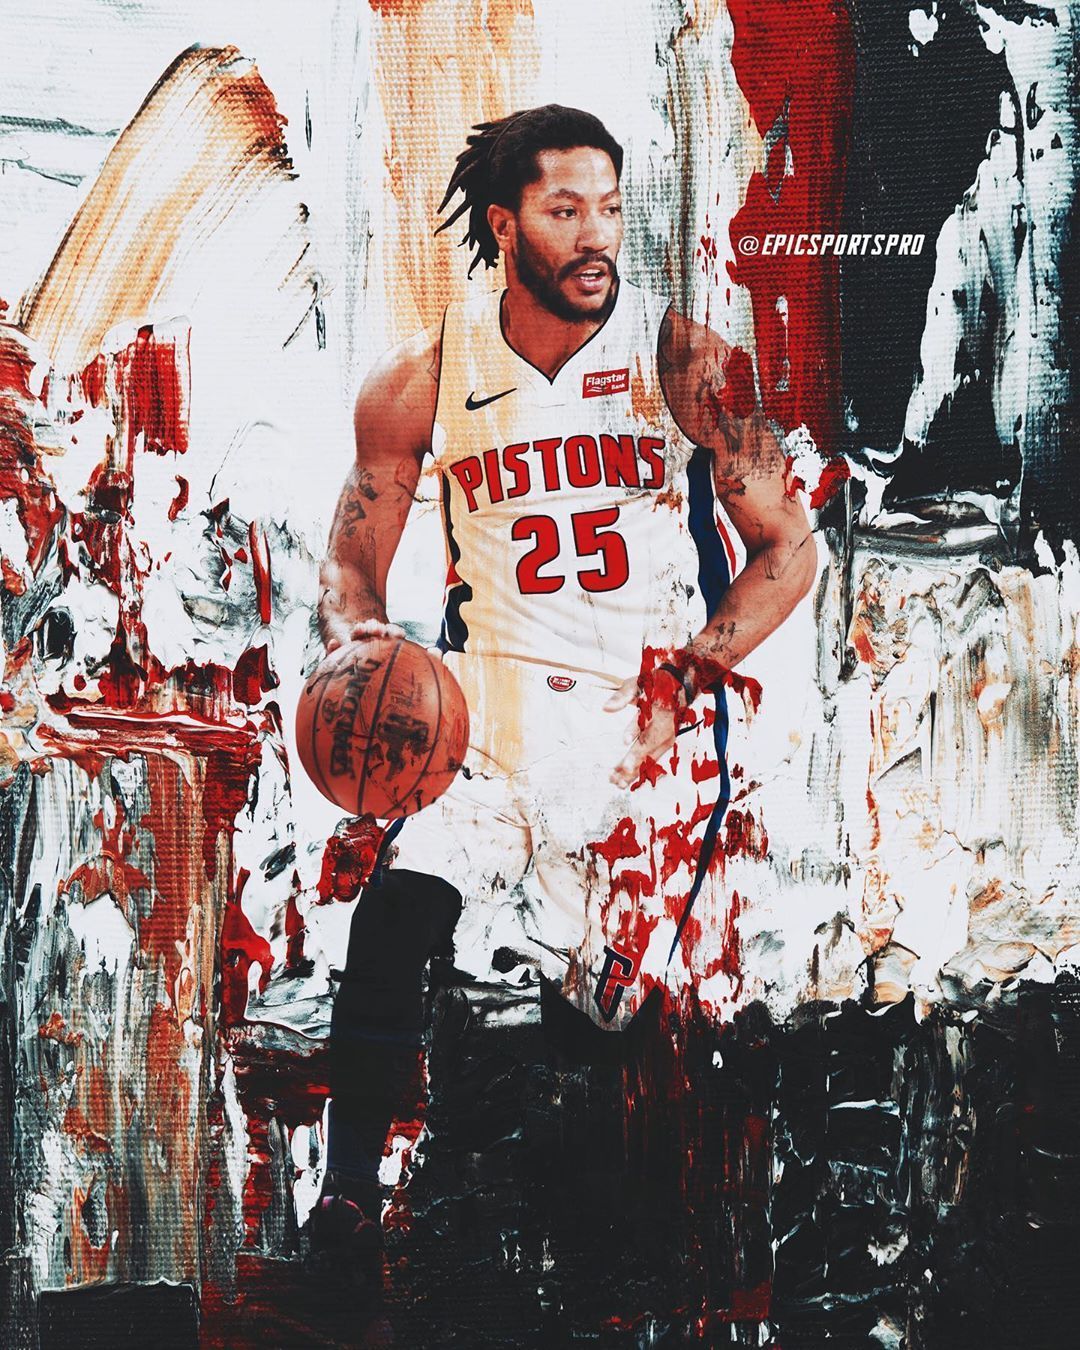 Derrick Rose has agreed to a 2 year, $15 million deal with the